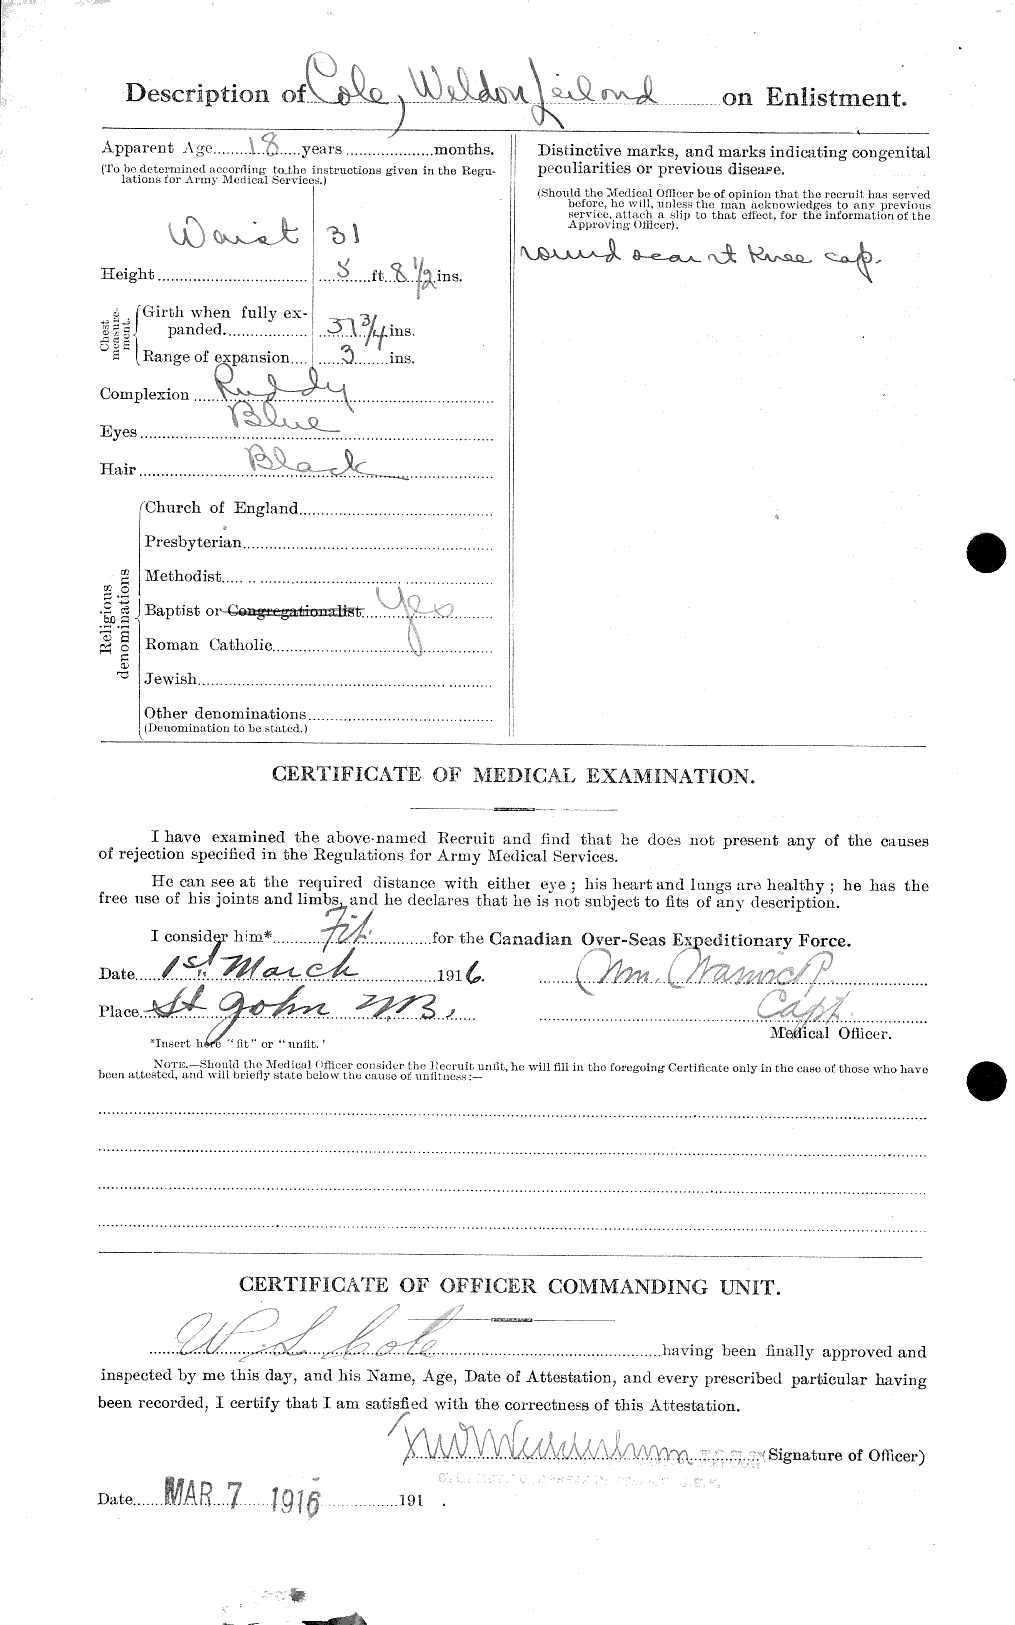 Personnel Records of the First World War - CEF 027980b